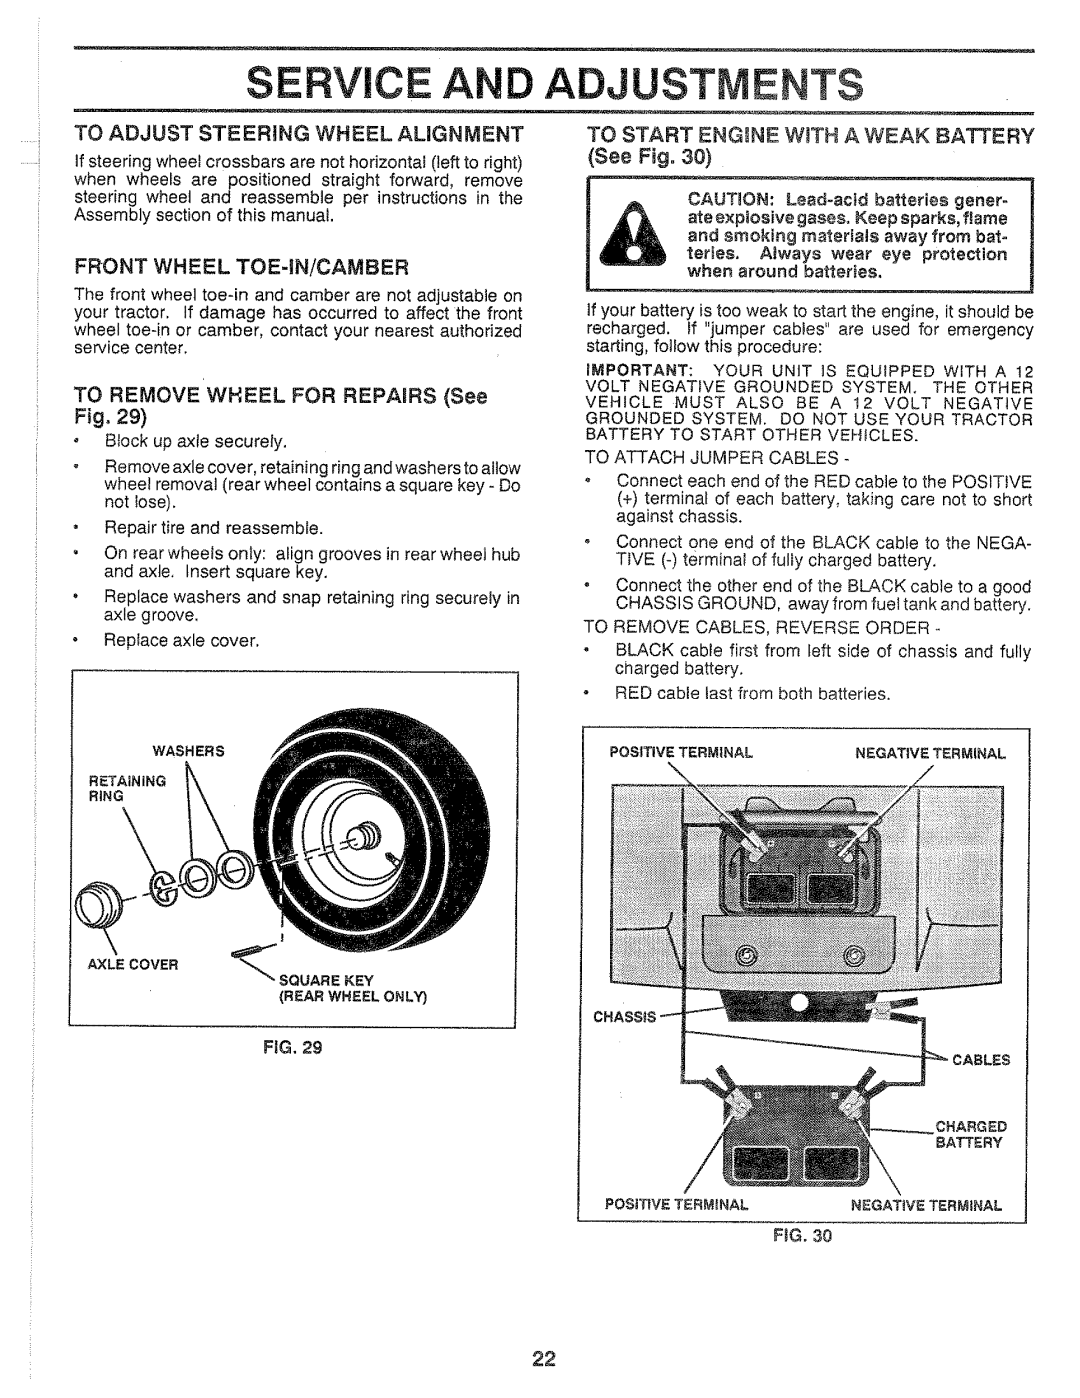 Sears 917.25559 manual To Adjust Steering Wheel Alignment, Front Wheel Toe-In/Camber, TO REMOVE WHEEL FOR REPAIRS See Fig 